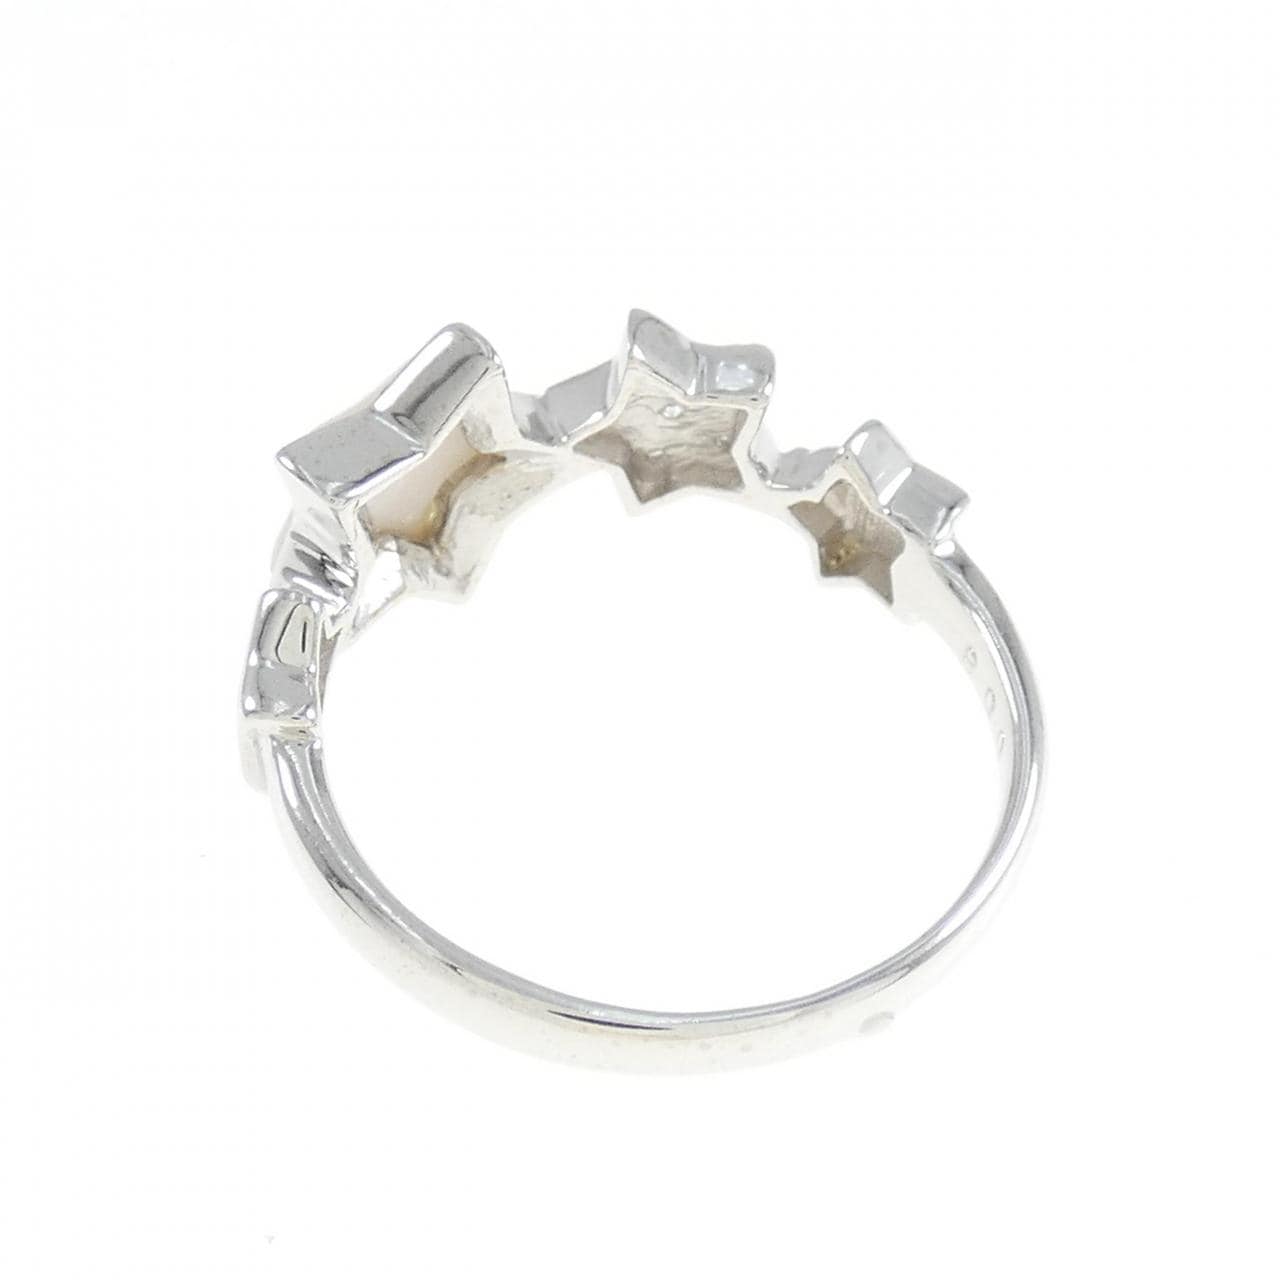 K18WG star mother of pearl ring